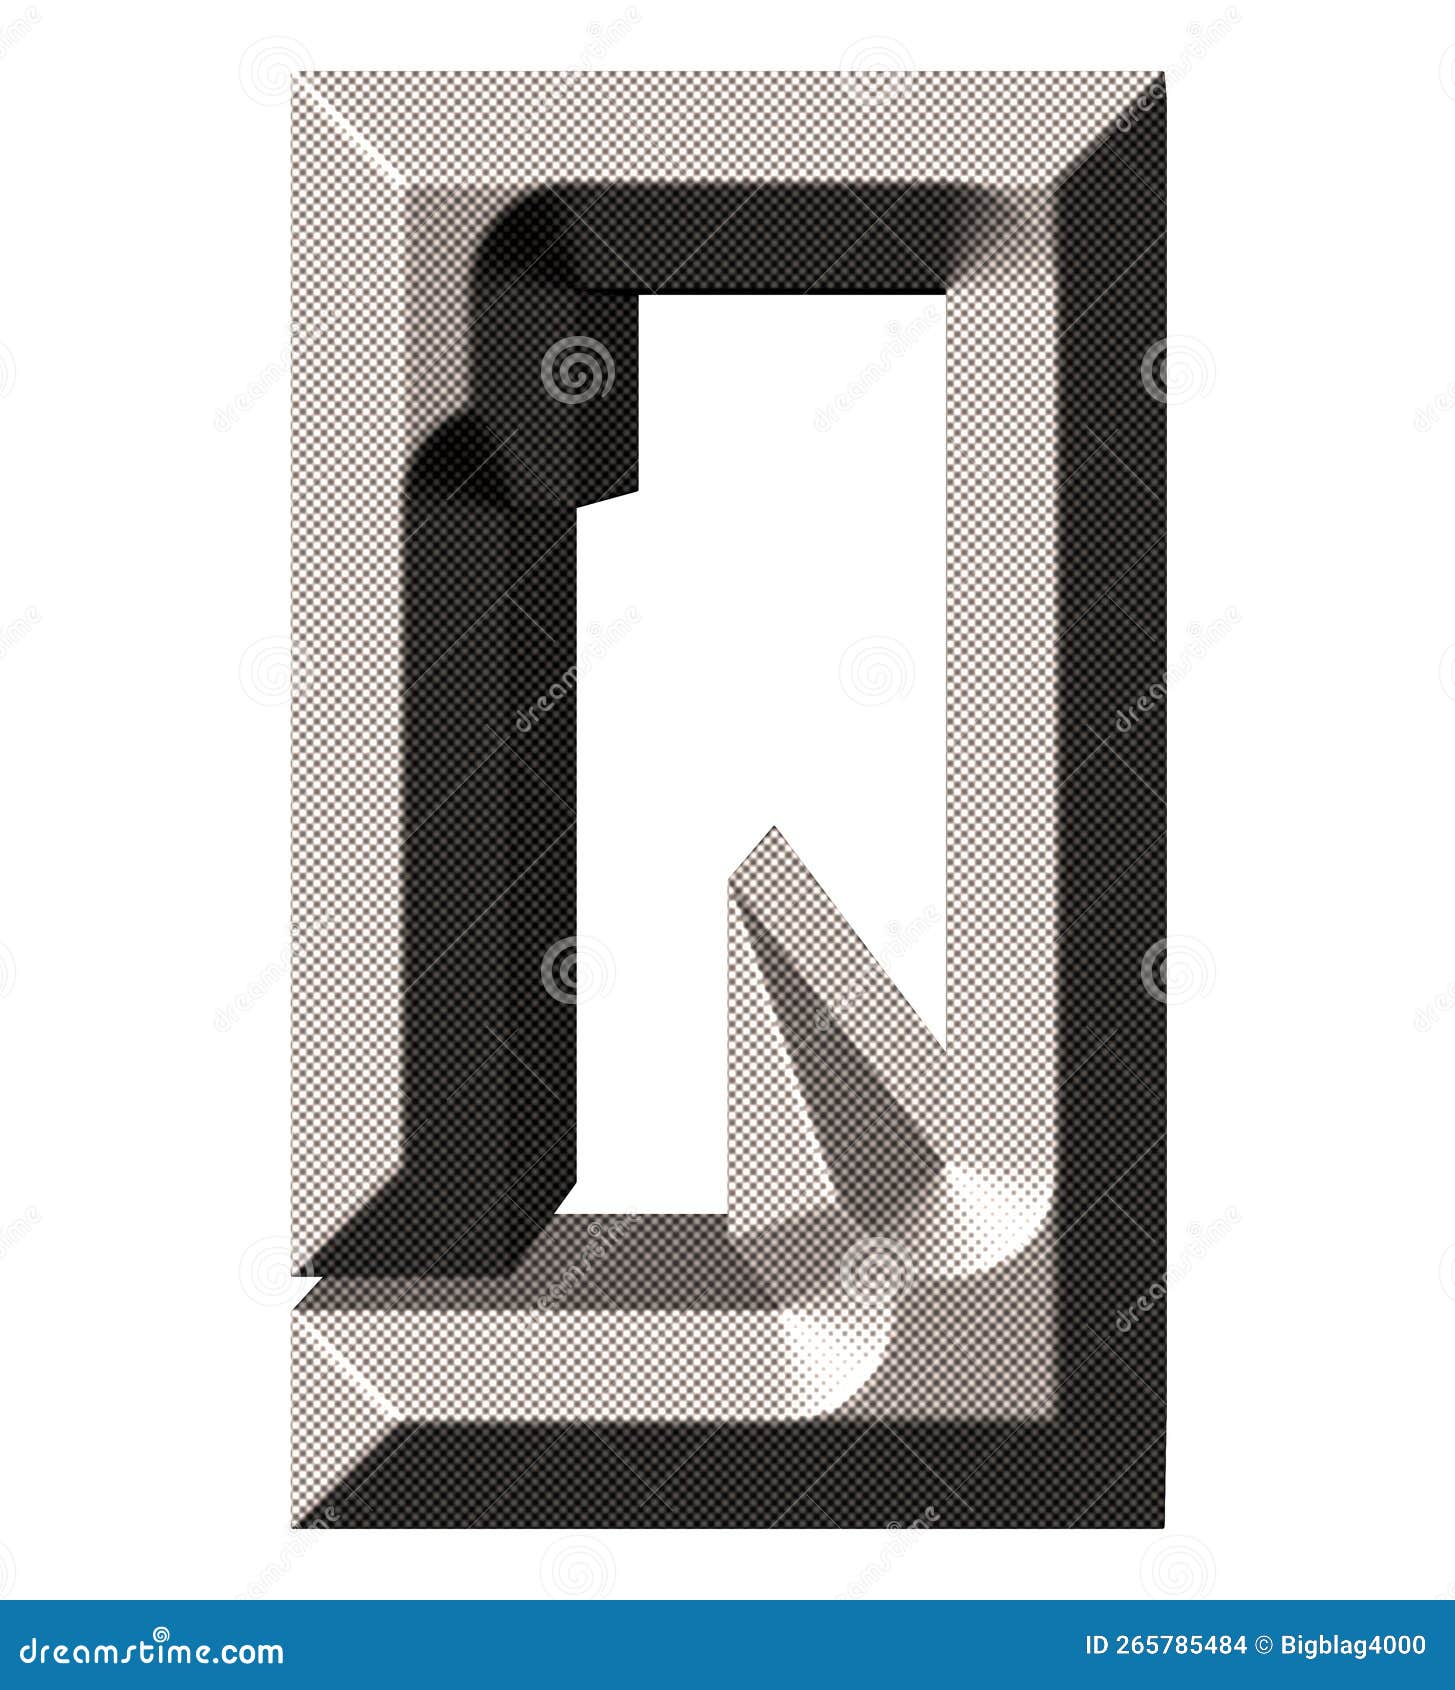 Newspaper Stylized Letter Isolated on White Background.Rendered 3D ...